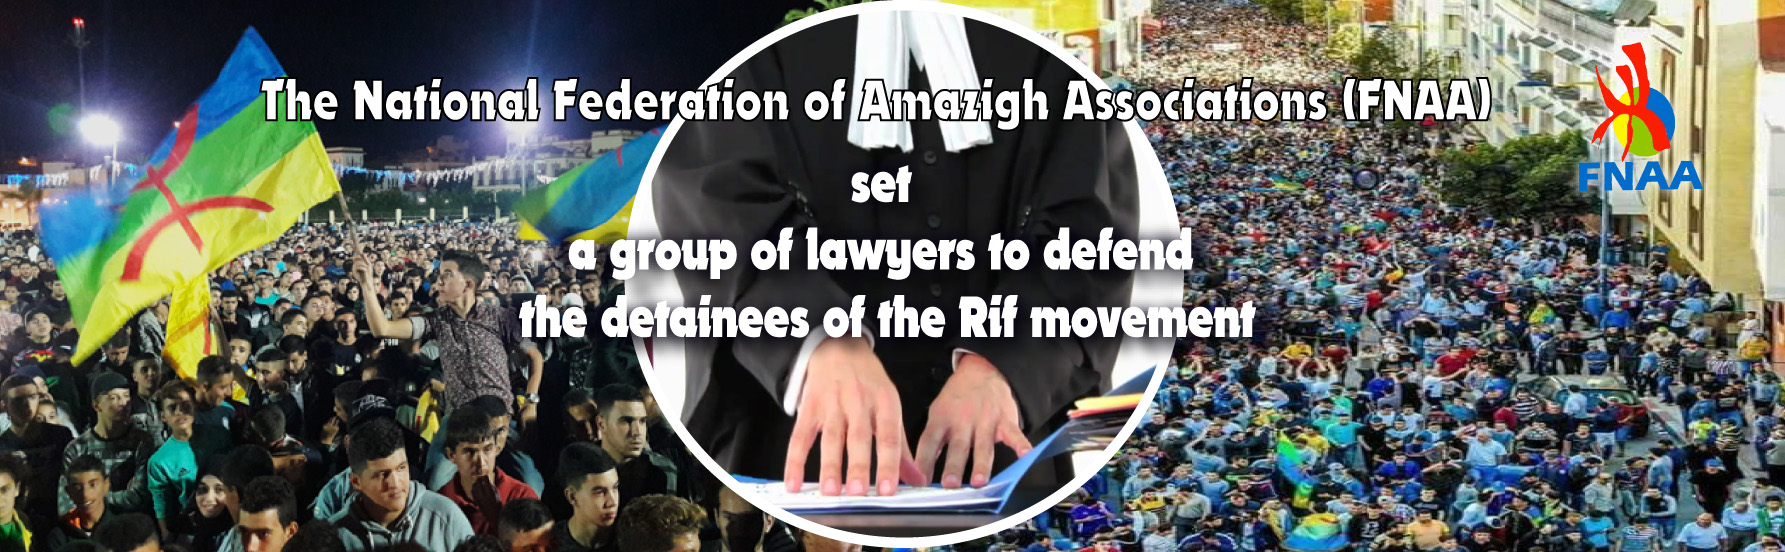 The National Federation of Amazigh Associations (FNAA) set a group of lawyers to defend the detainees of the Rif movement